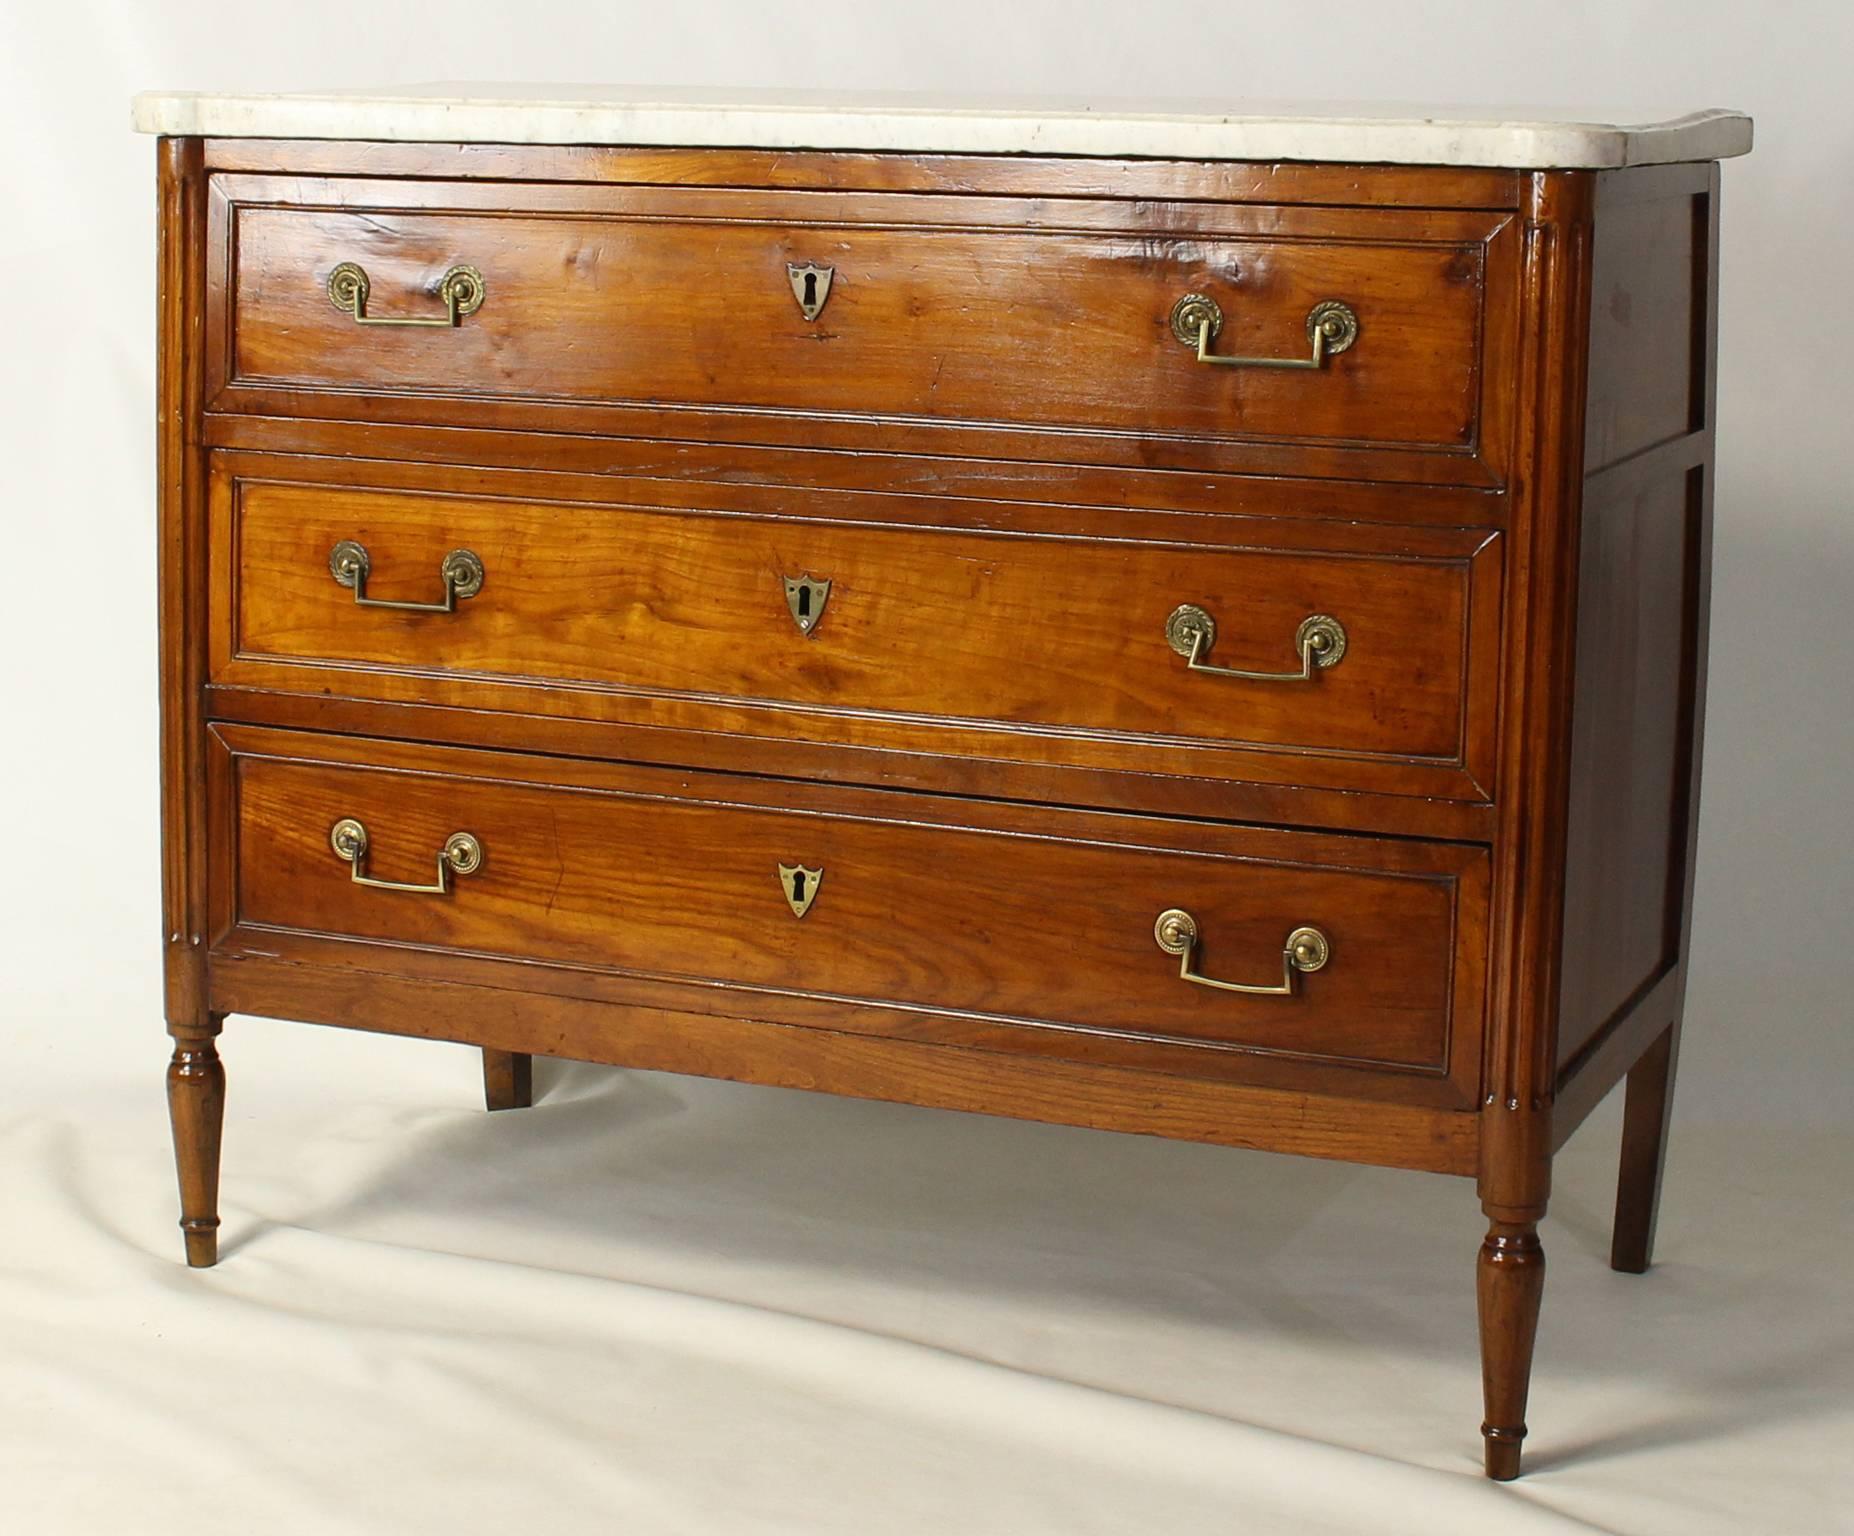 A fine early 19th century French three-drawer Directoire commode with brass rectangular handles flanked on either side by fluted column corners raised on turned tapering front legs retaining its original mellow white marble top.